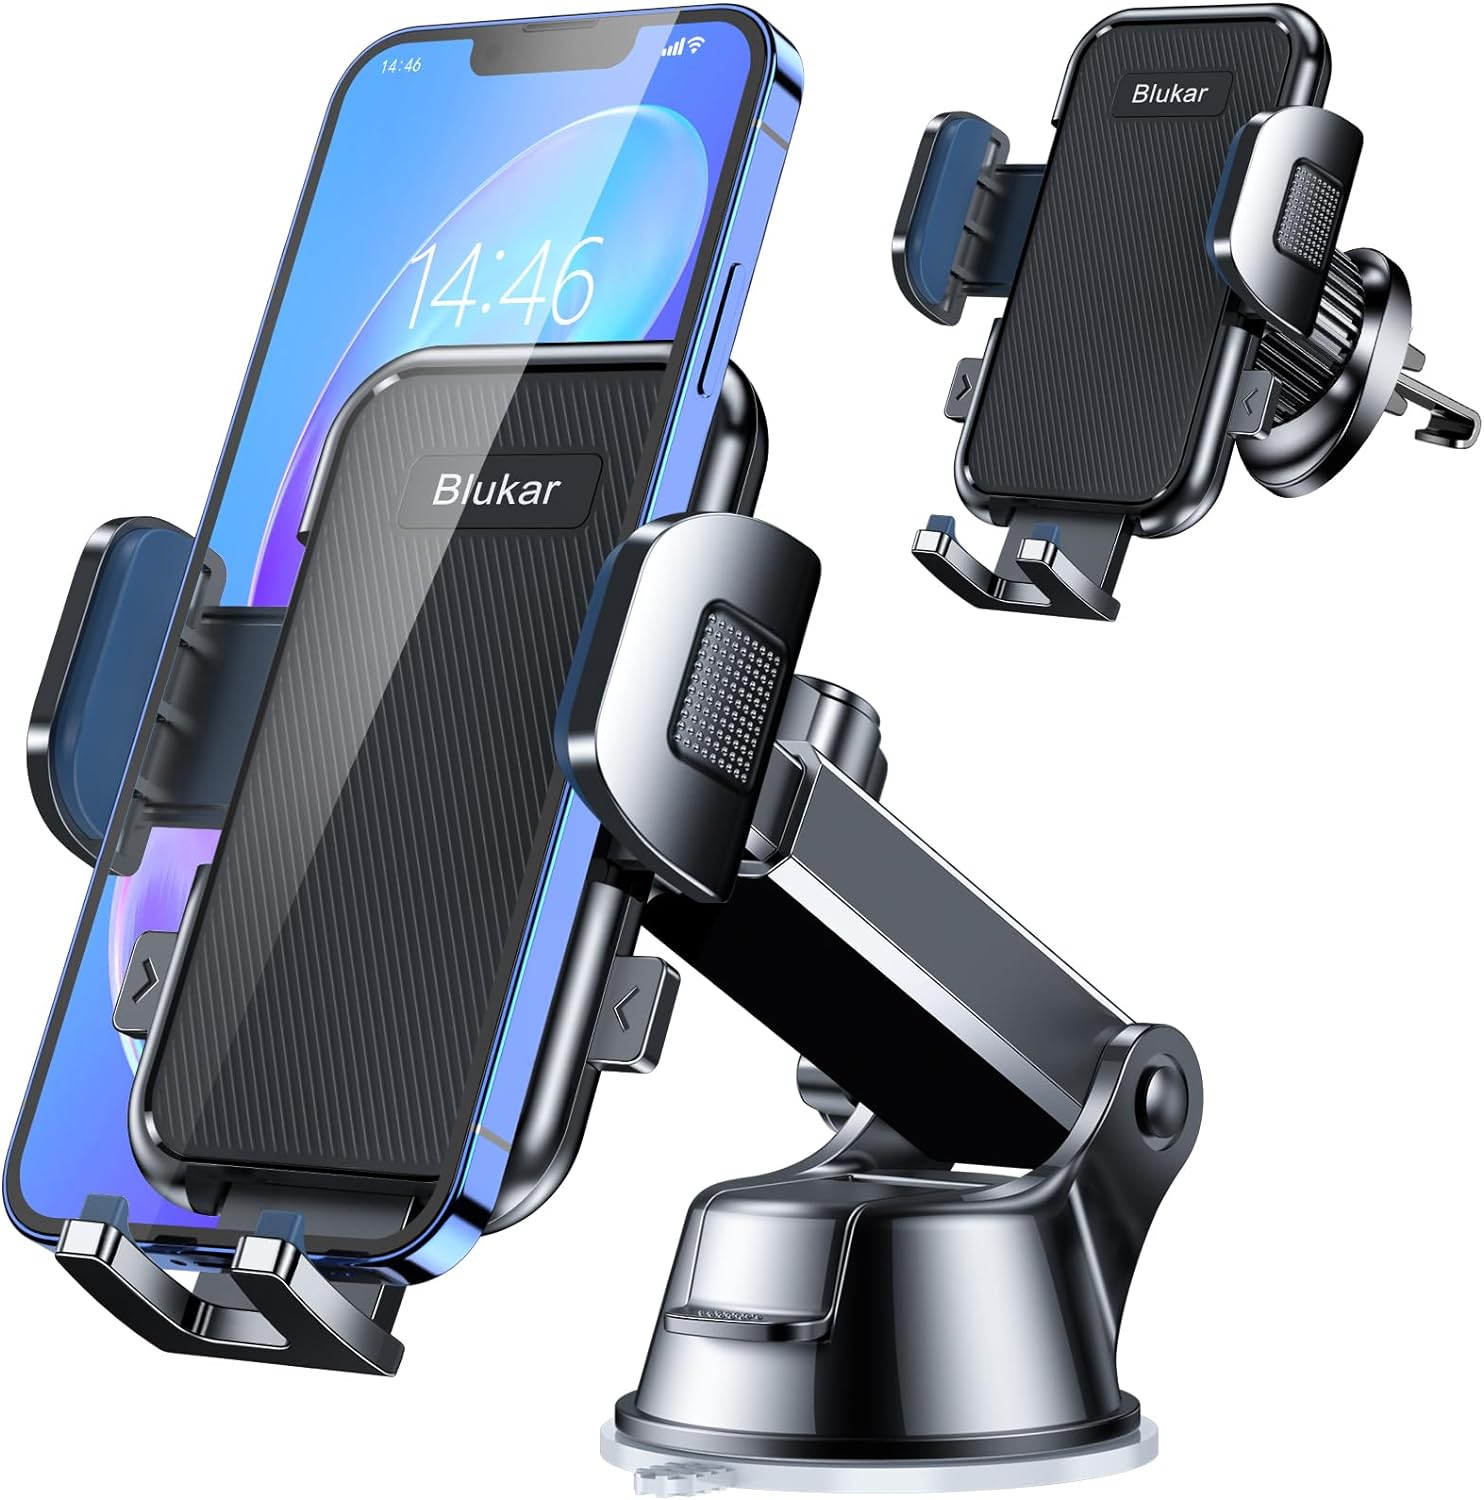 Blukar Adjustable Phone Mount Cradle 360° Rotation - 4 in 1 Strong Suction Phone Holder for Car Dashboard/Windscreen/Air Vent - One Button Release for 4.0 to 6.7 inch Phones